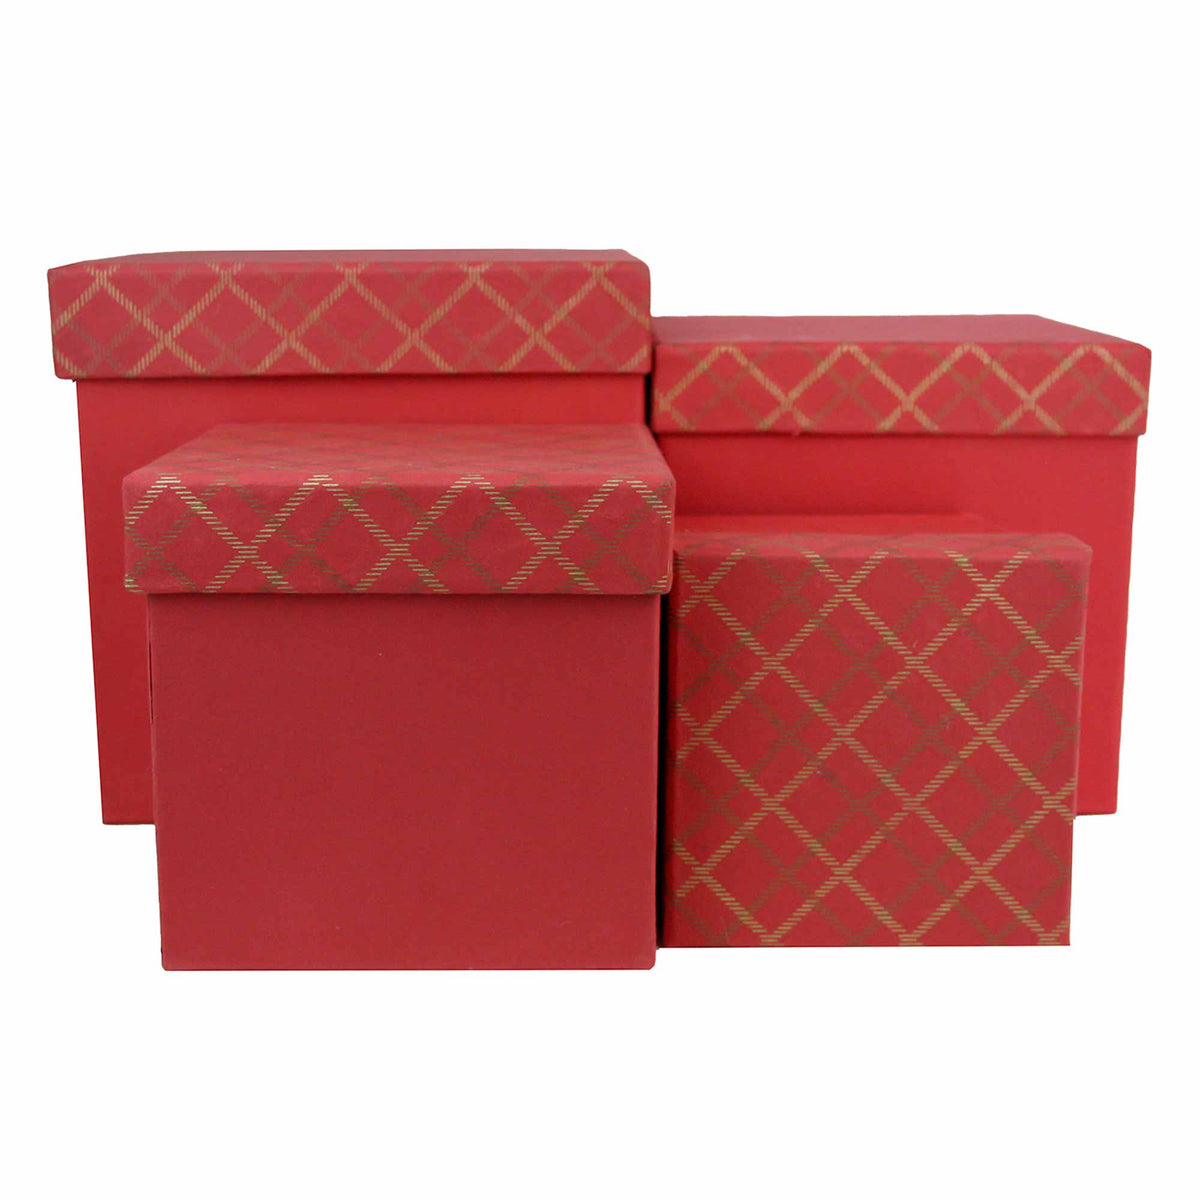 Handcrafted Chequered Red Gift Boxes - Set of 4